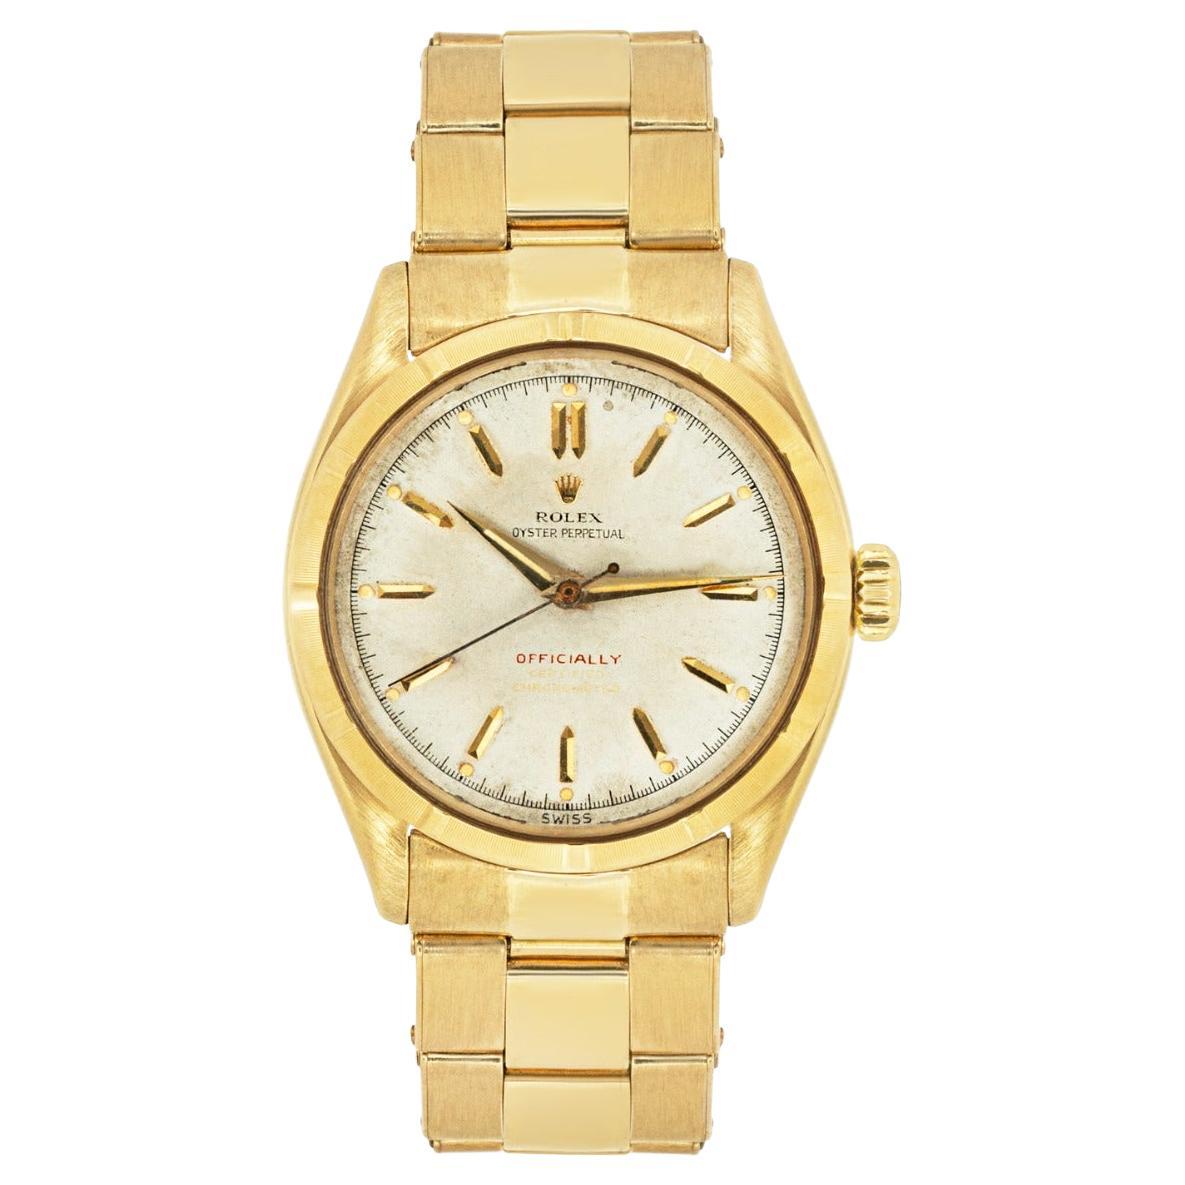 Rolex Seltener Oyster Perpetual Gelbgold 6285